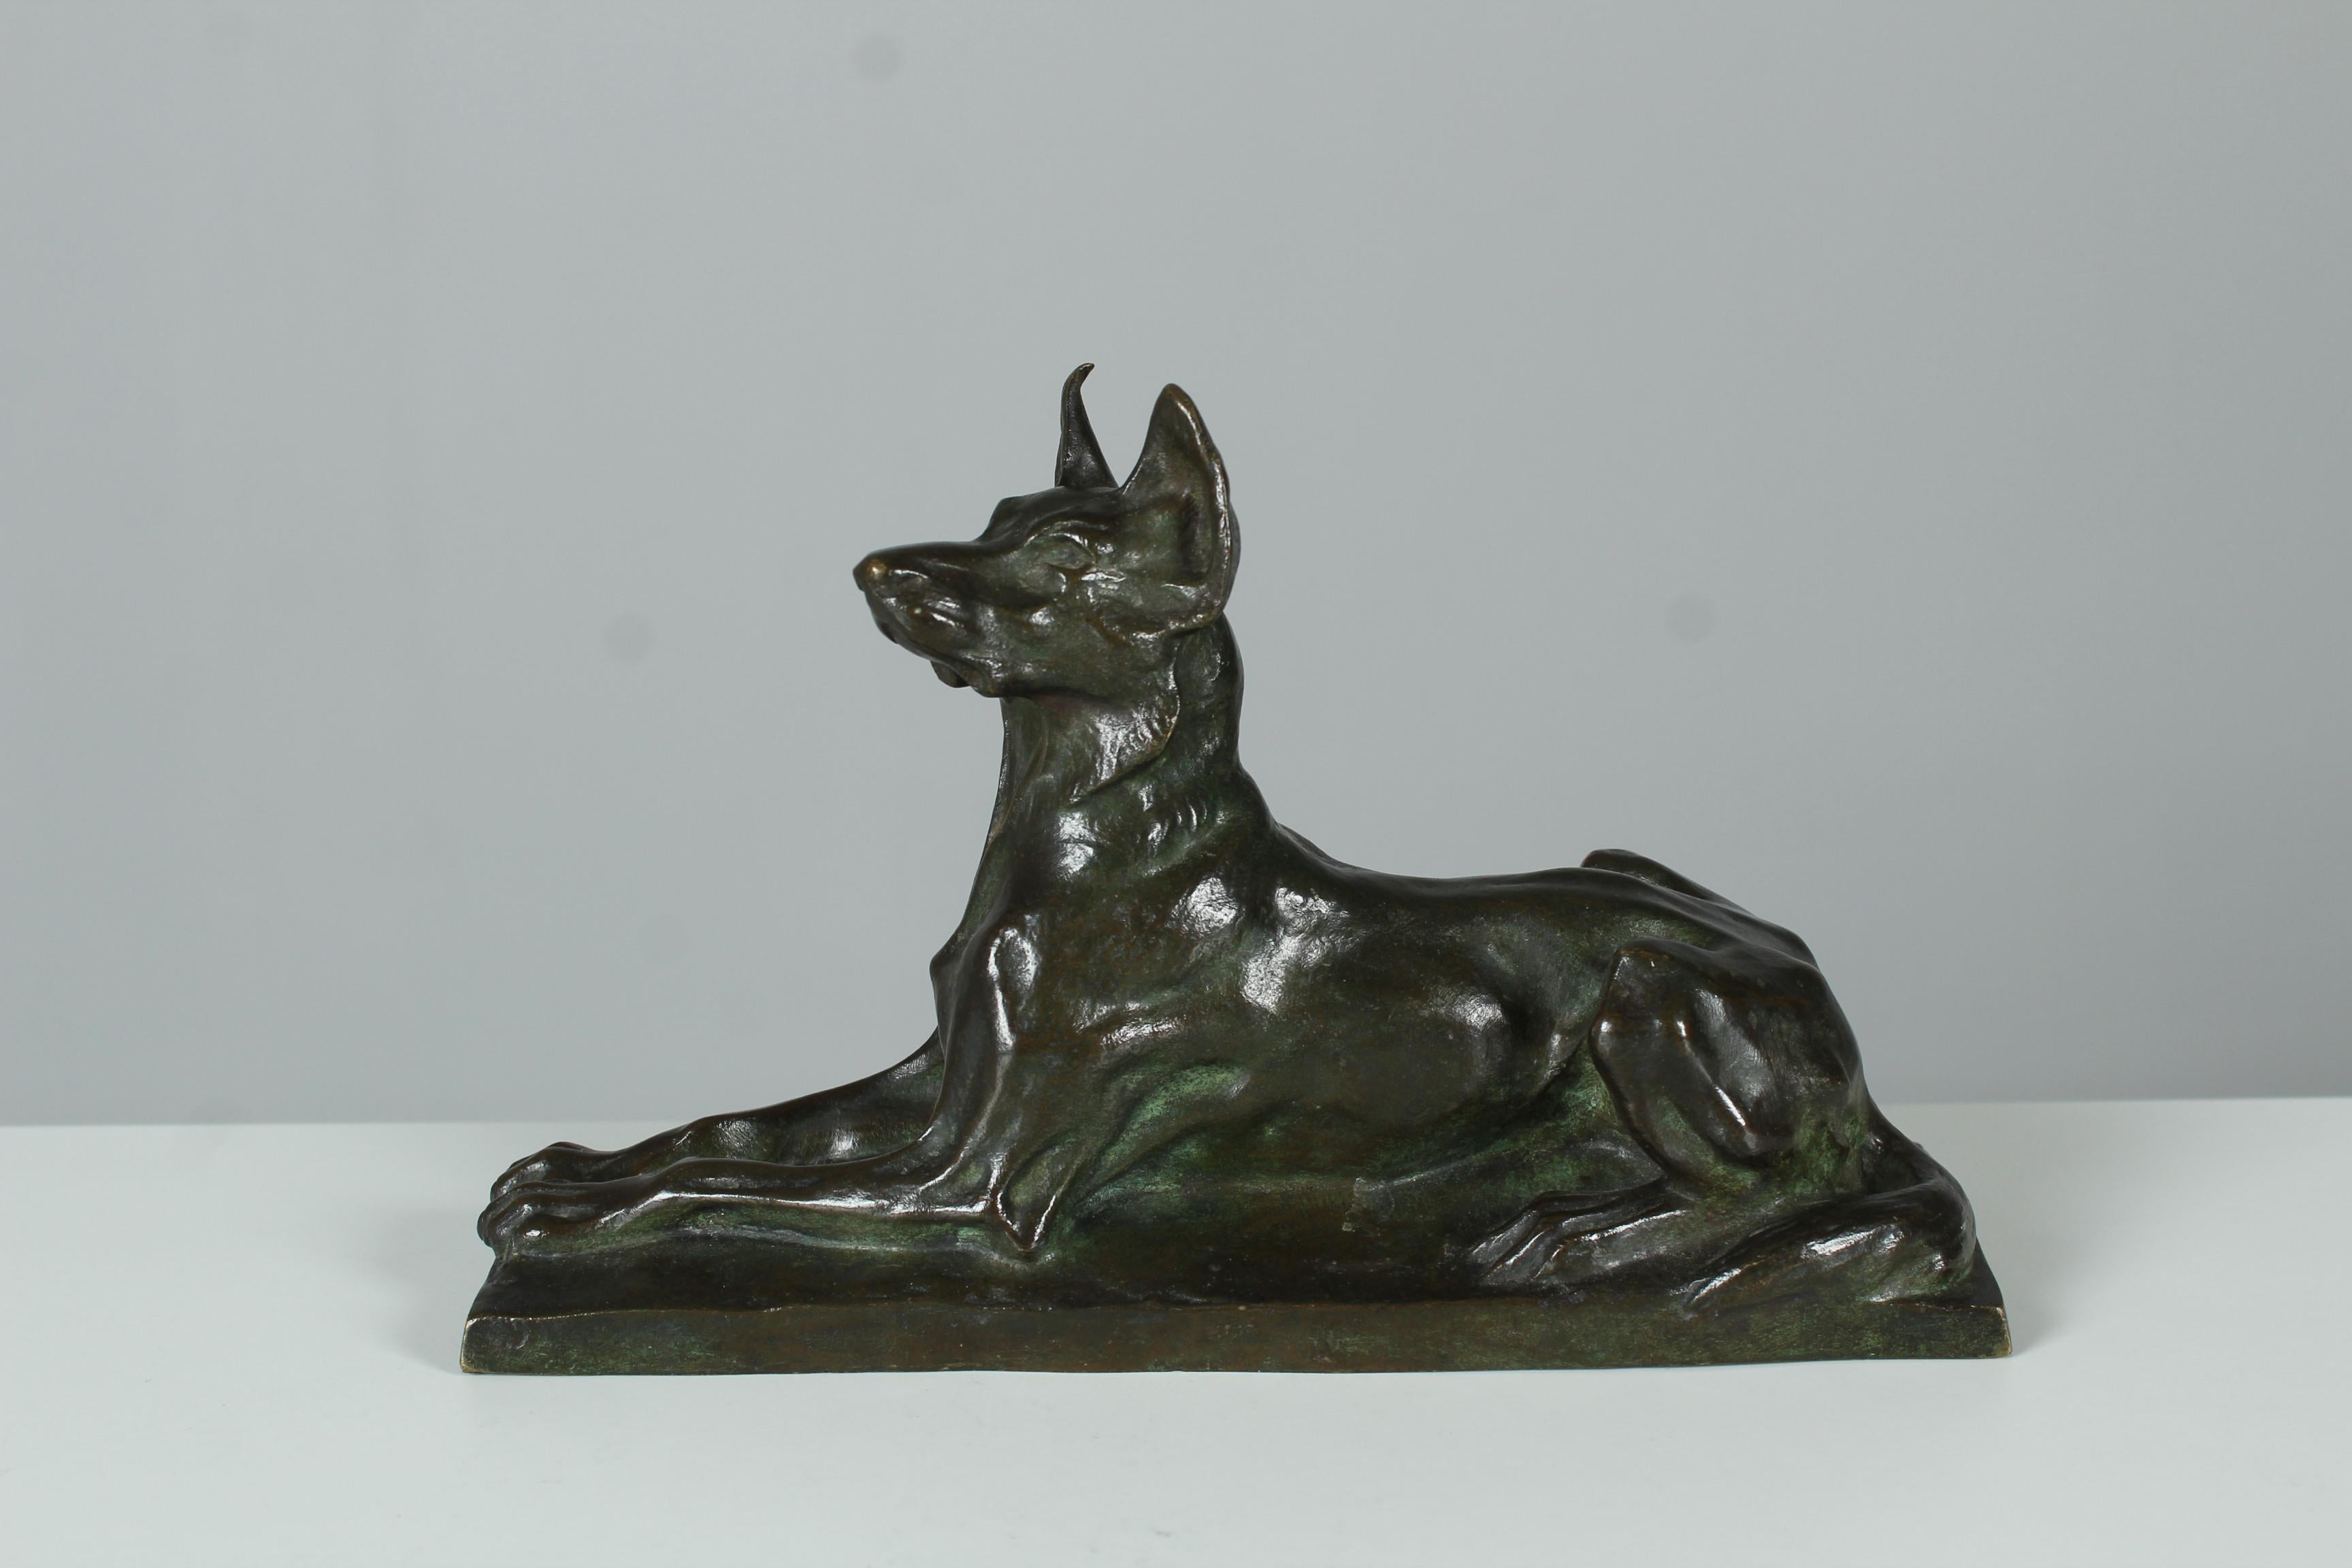 Exceptional sculpture of an German Shepherd by the french artist Charles Louis Eugène Virion (born in Ajaccio 1865, until 1946).
Nicely chiseled and patinated bronze work.
Signed at the plinth 